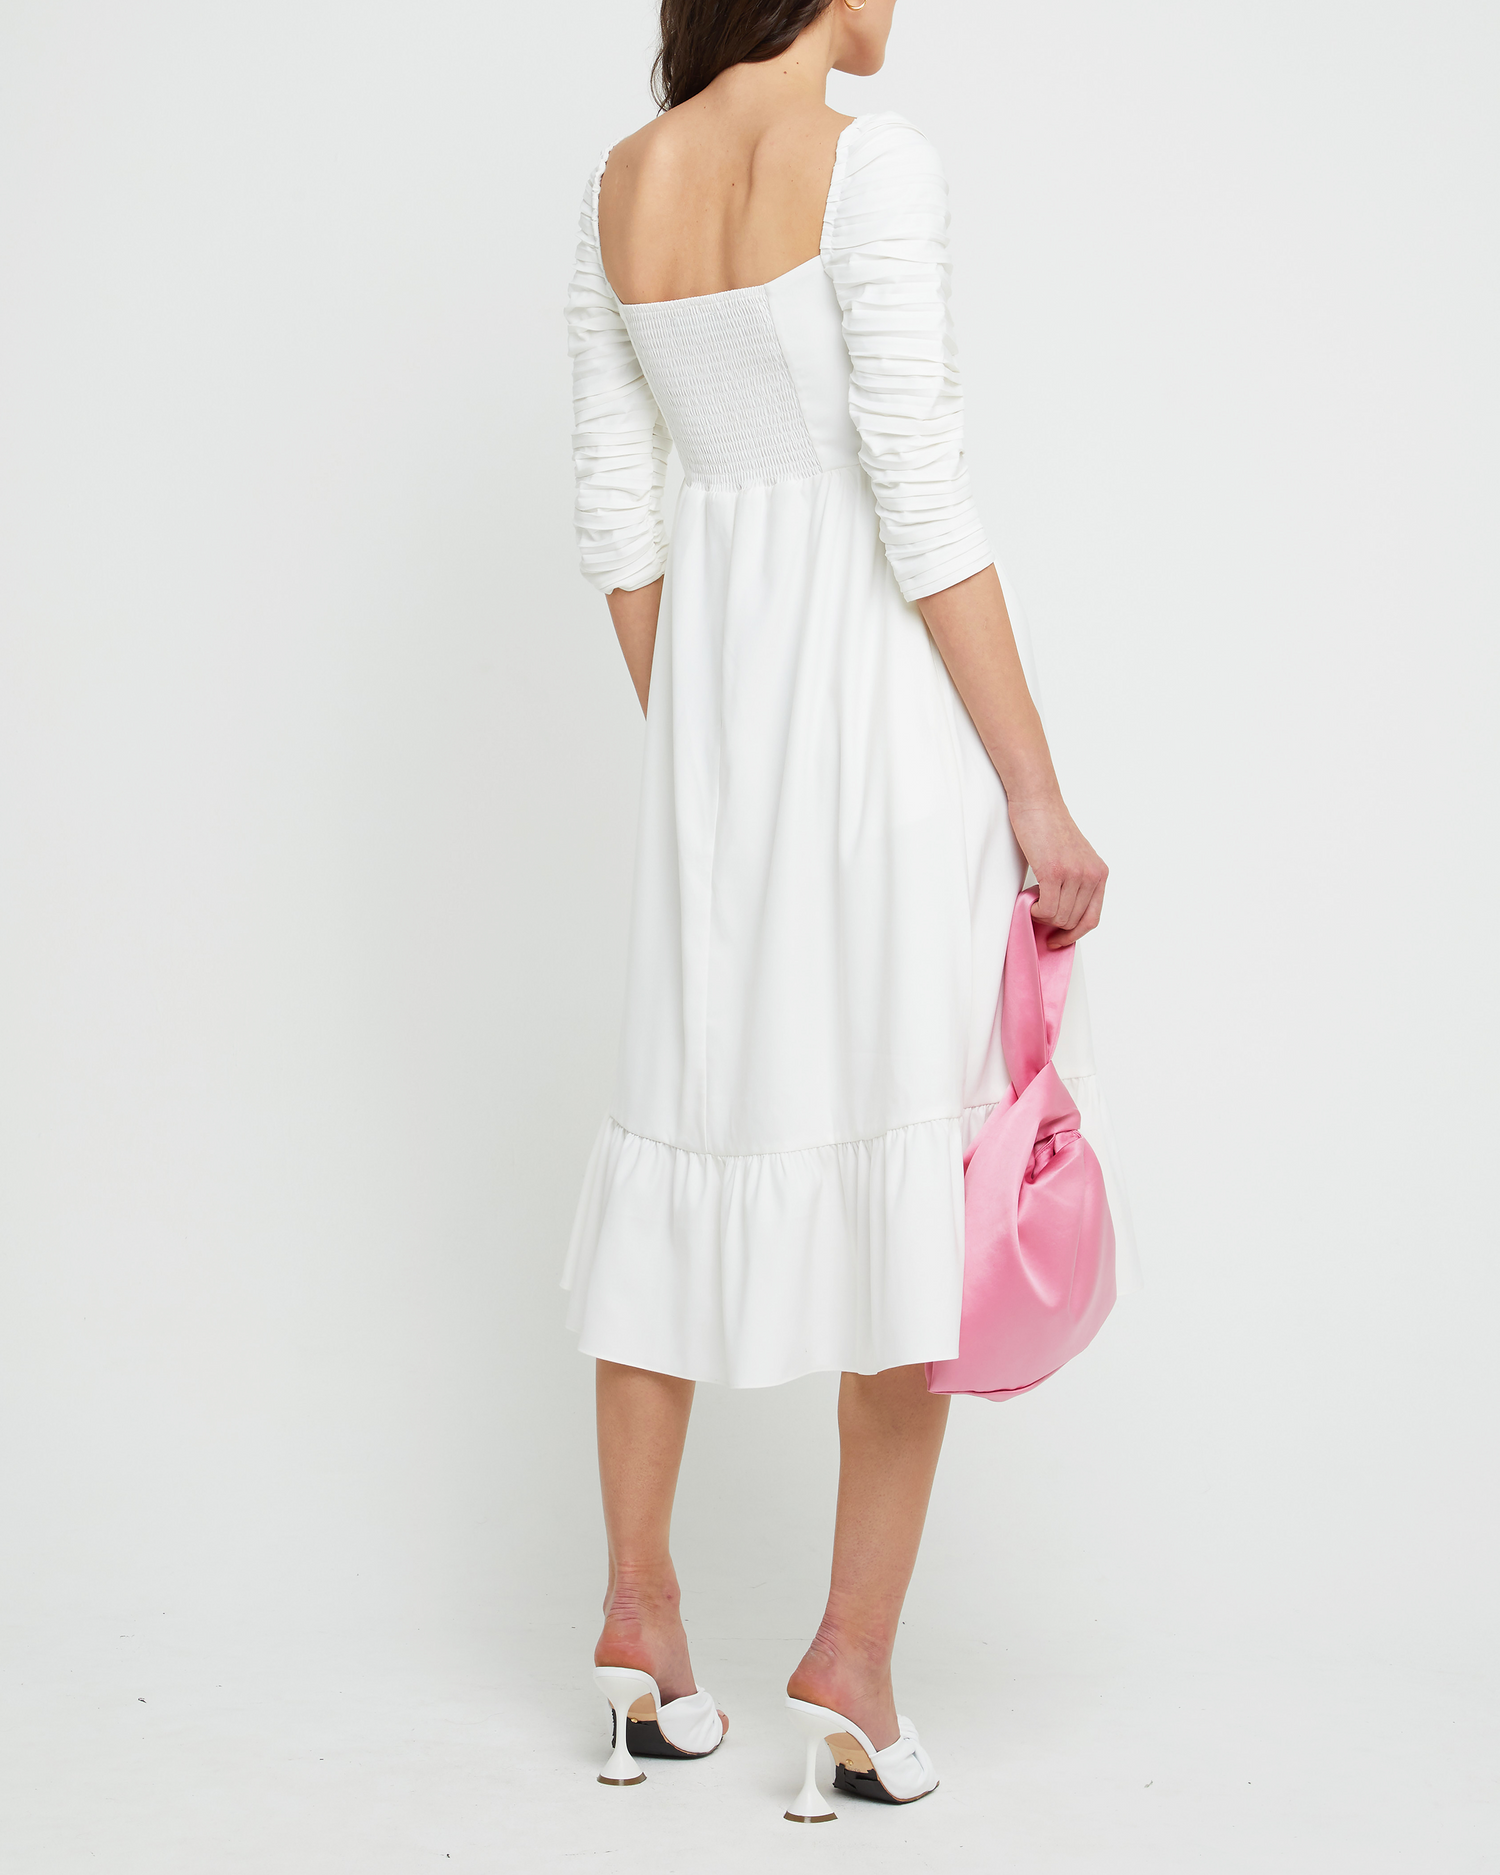 Second image of Bonnie Dress, a white midi dress, ruched bodice, mid sleeves, 3/4 sleeves, square neckline